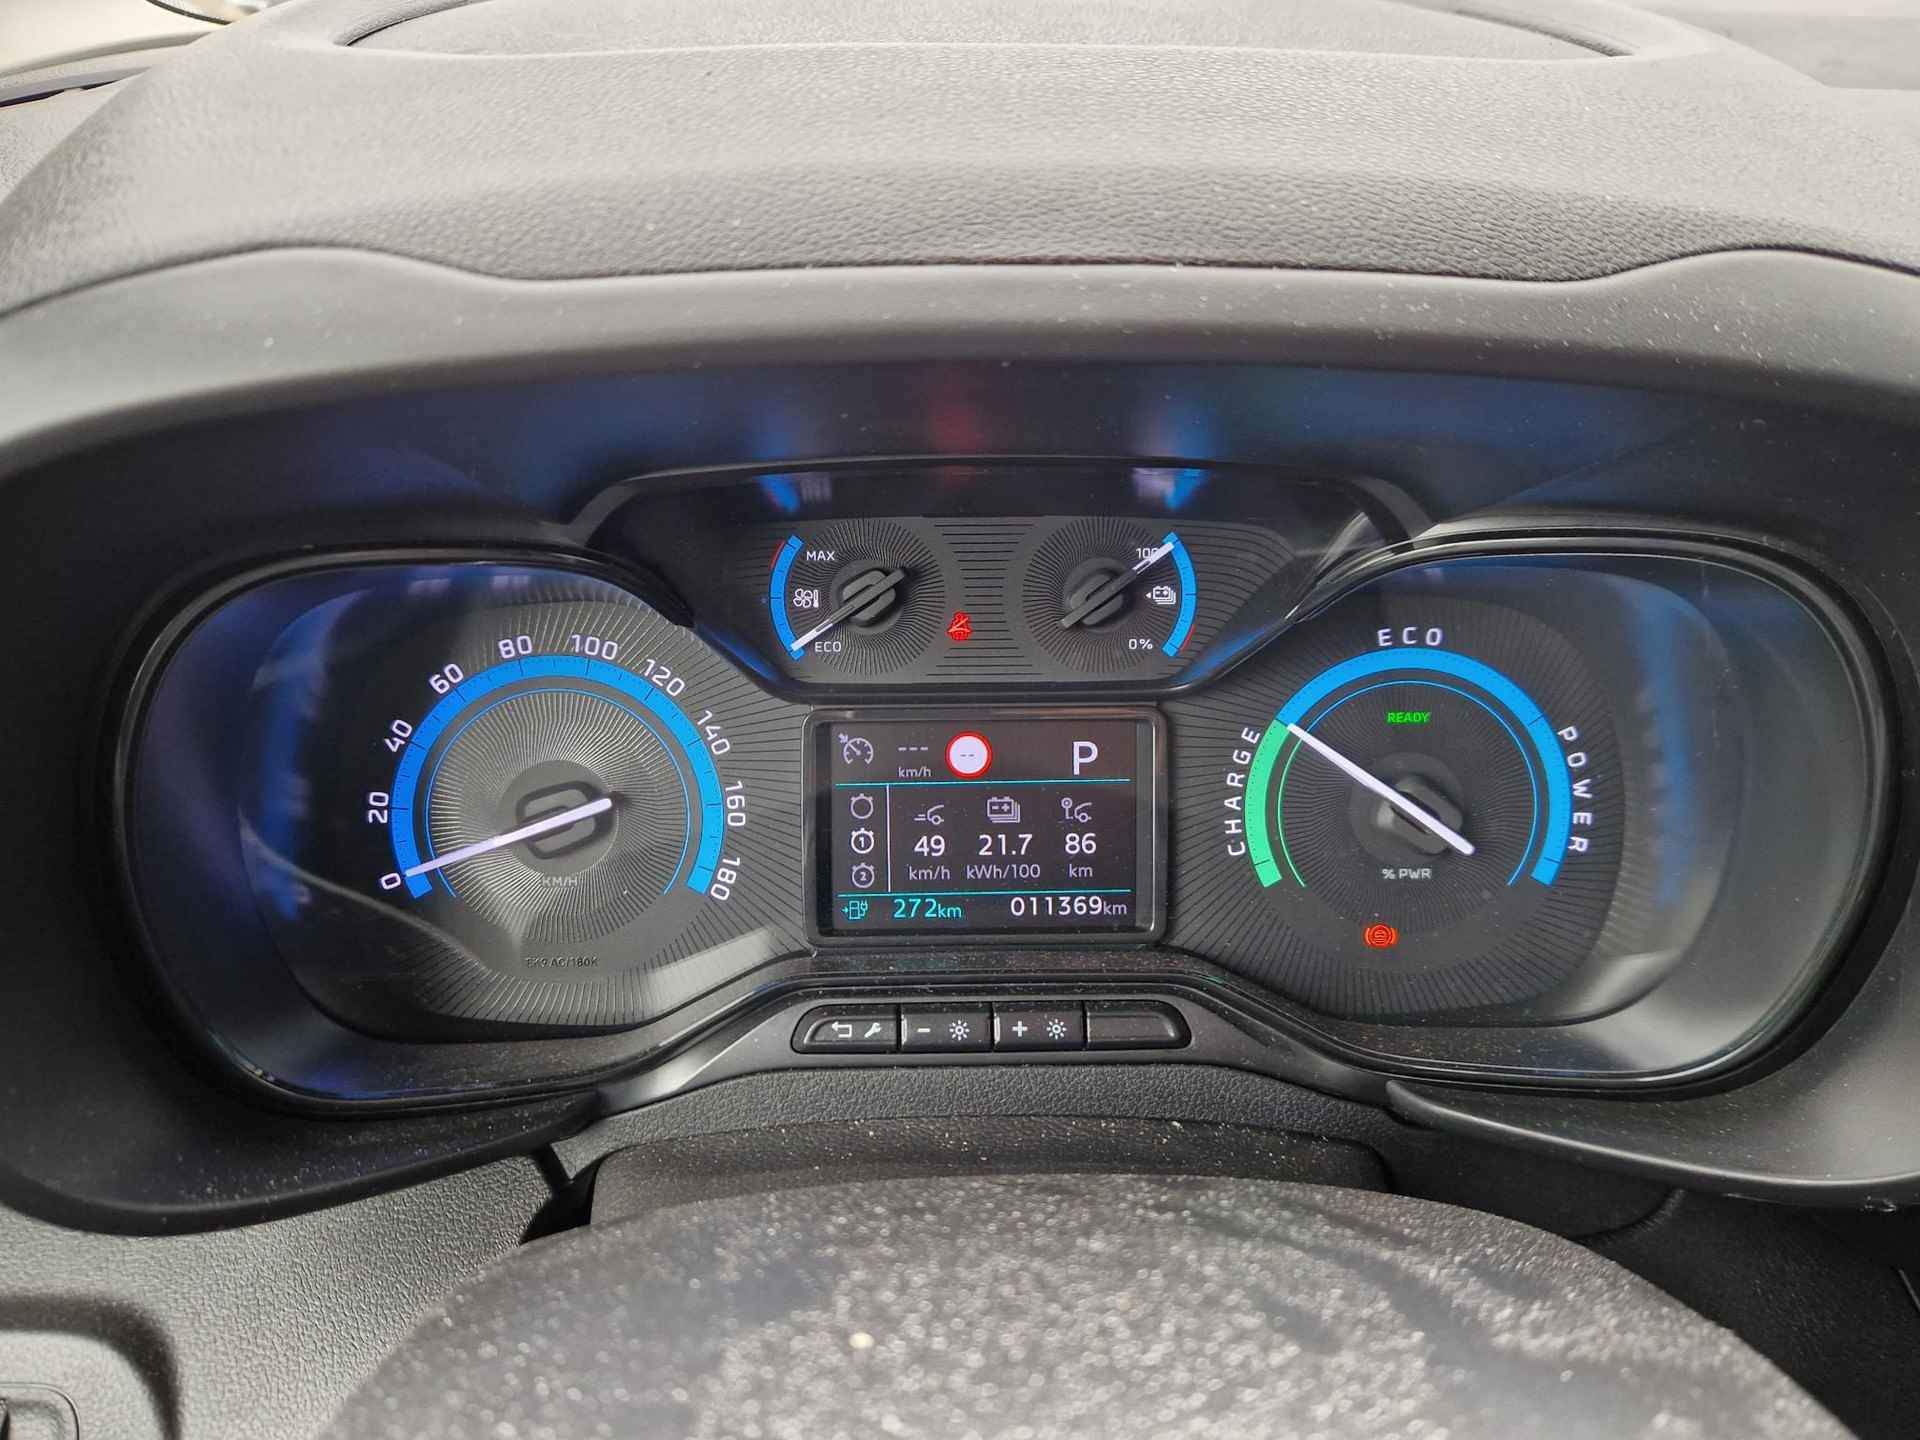 Toyota PROACE CITY Verso Electric Live Long 50 kWh - 14/26